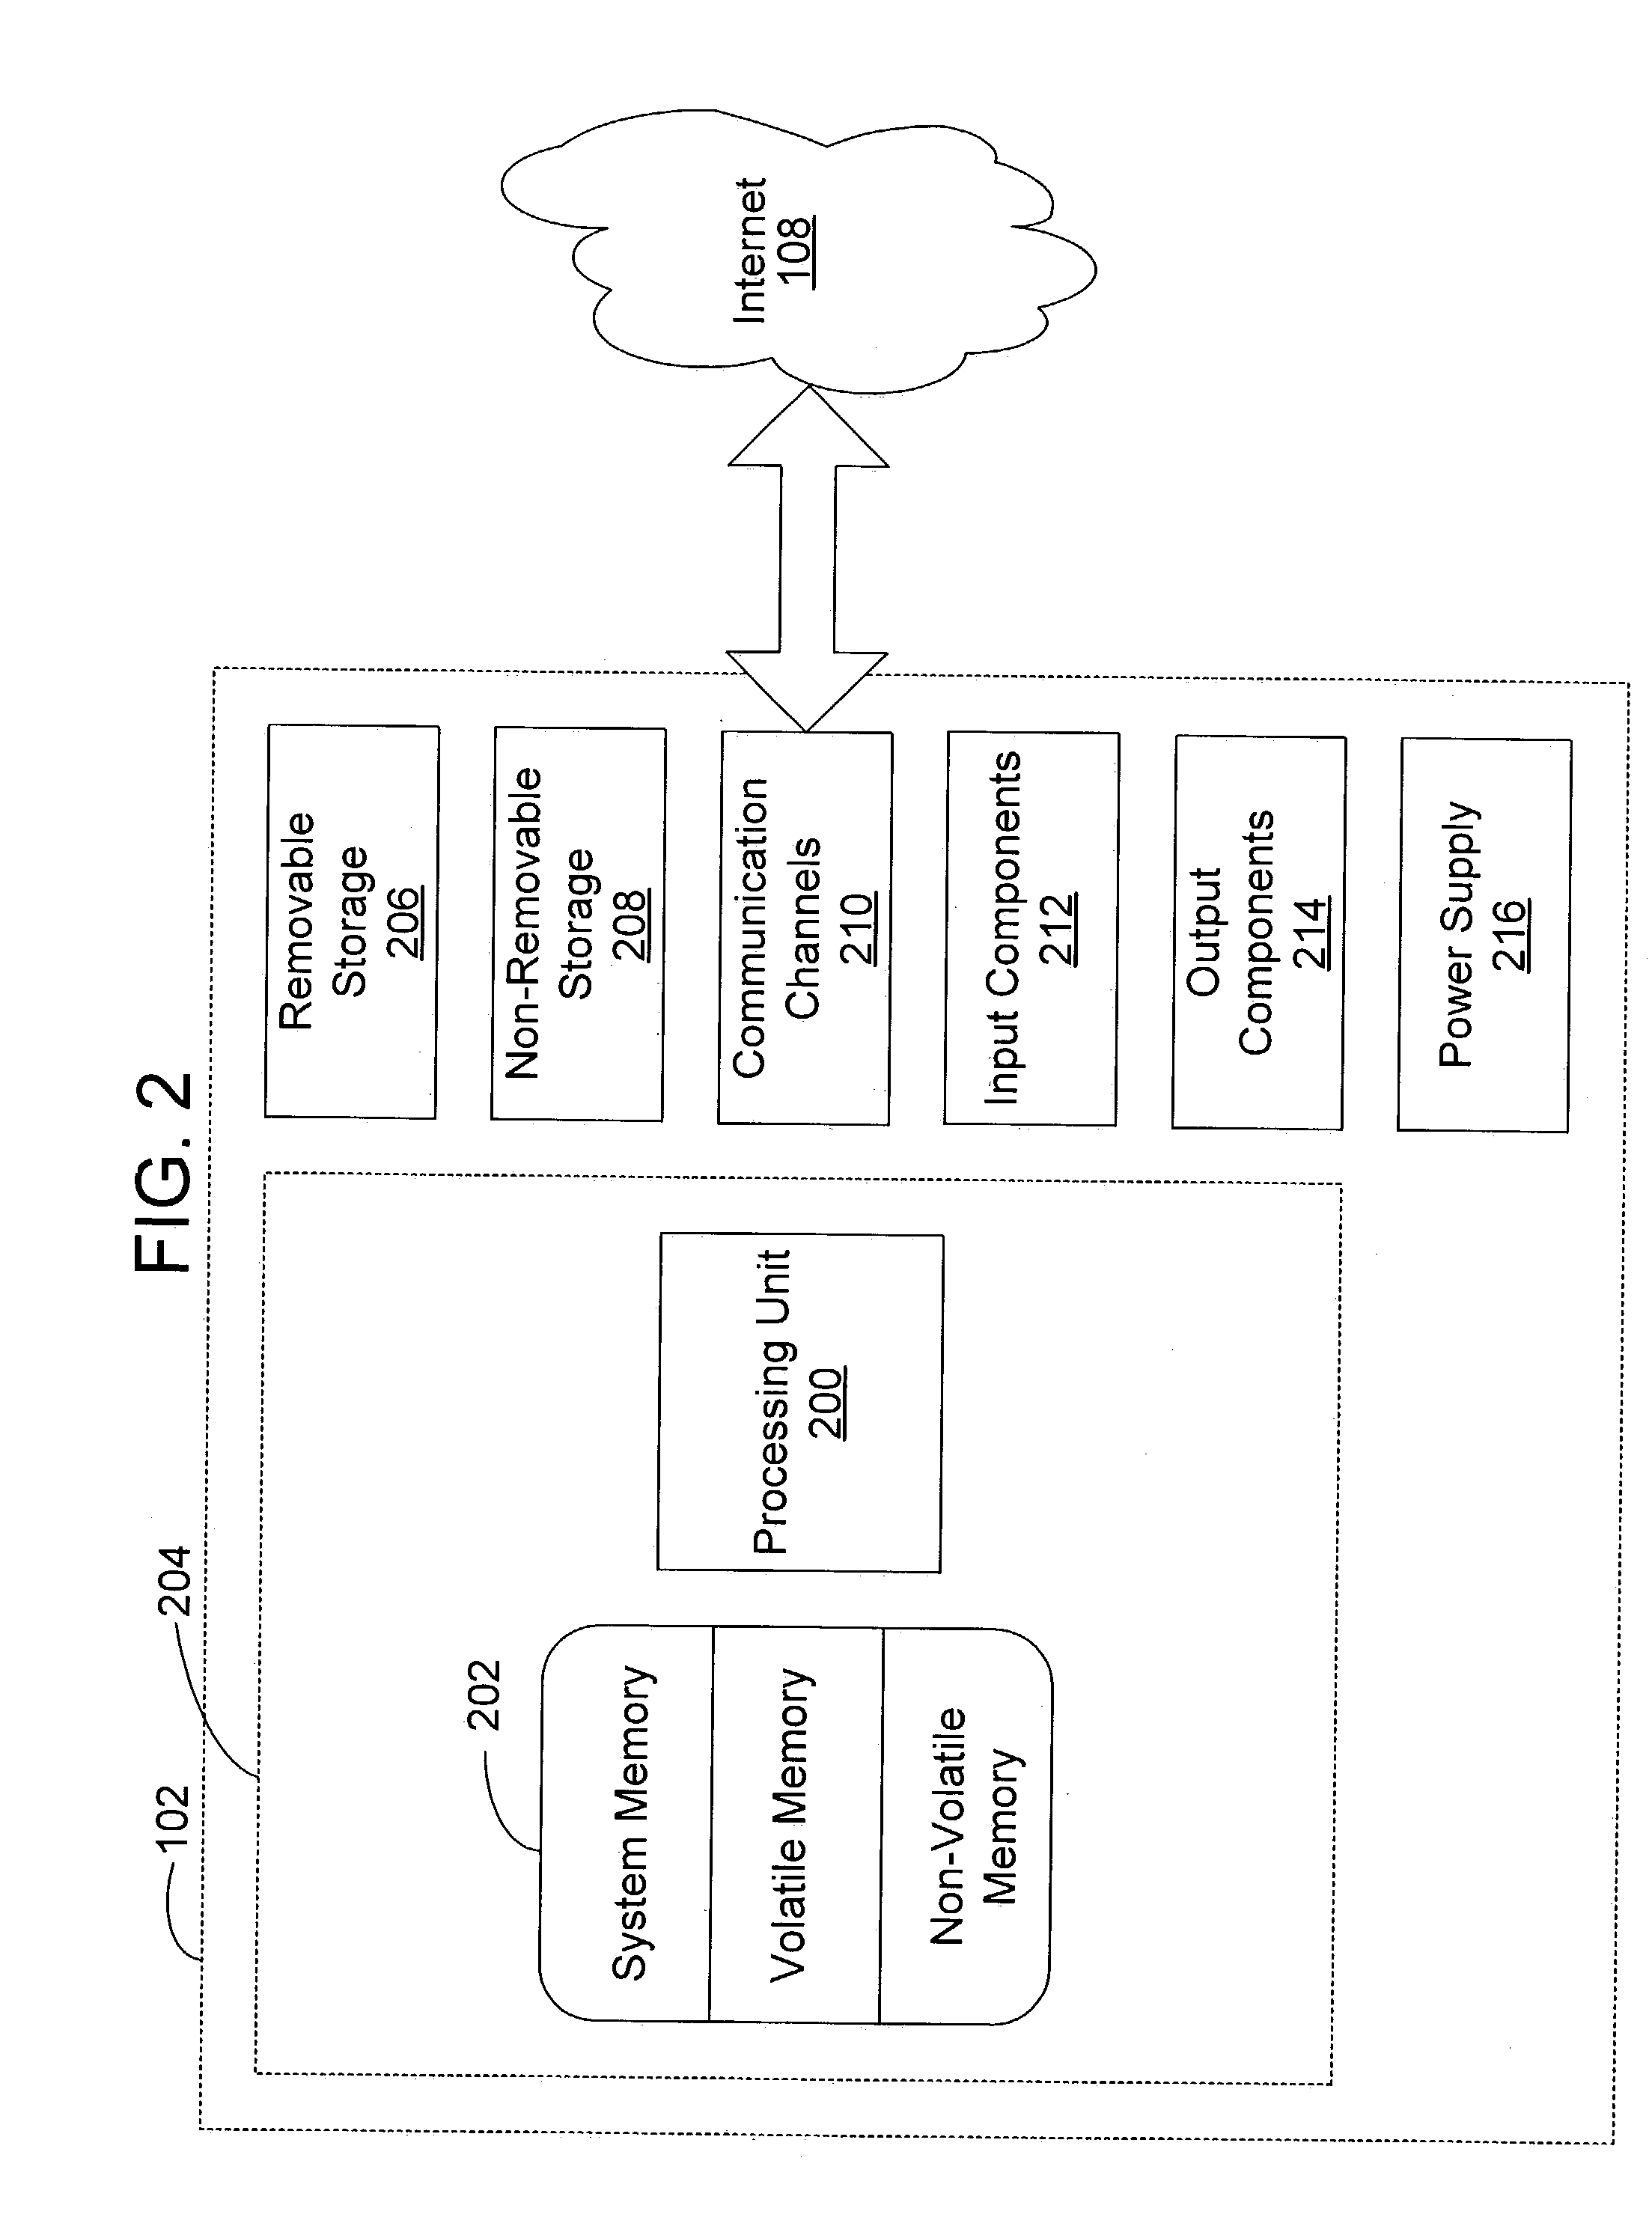 Methods and systems for authenticating messages